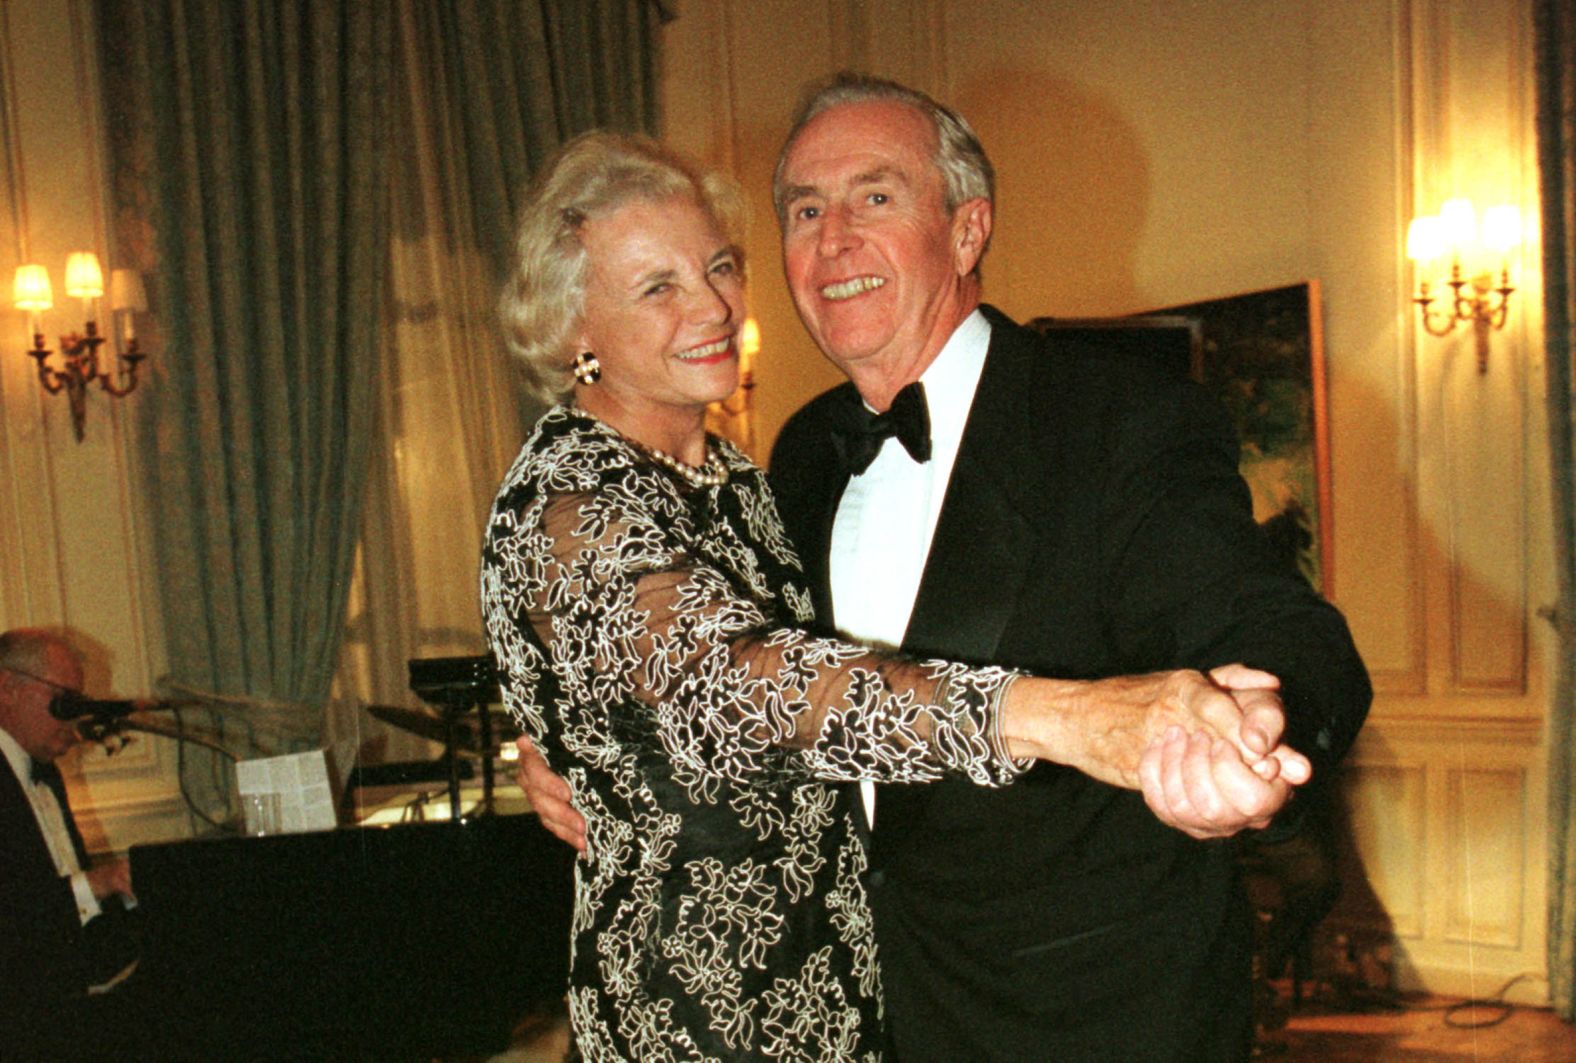 O'Connor dances with her husband, John, at a ball in Washington, DC, in 1998.